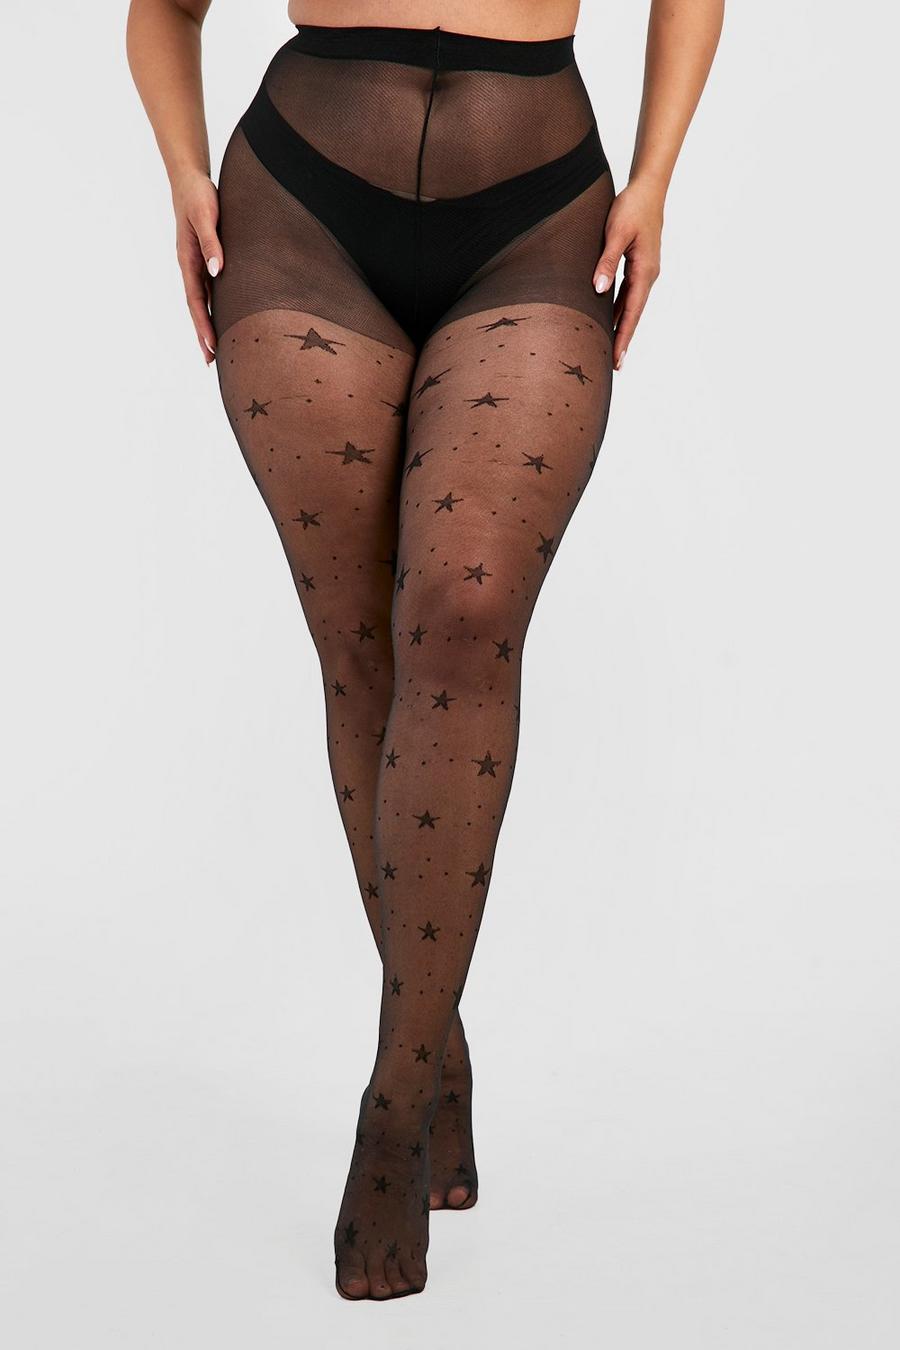 Hanes® Curves Opaque Tights with Control Top Hosiery